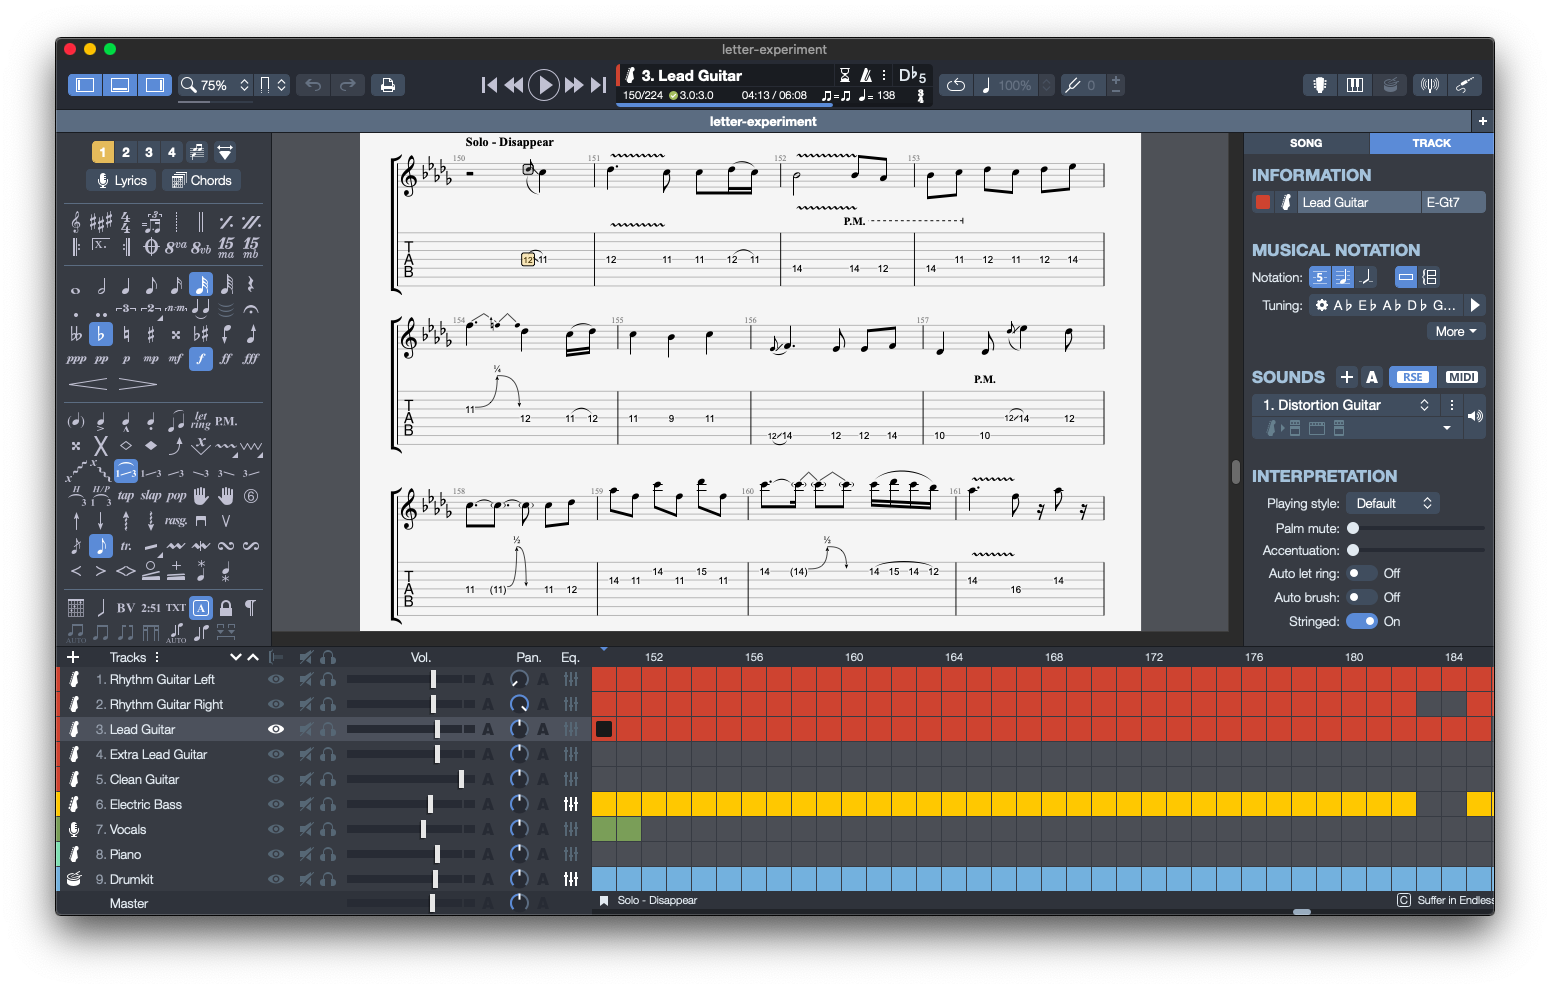 Screenshot of Guitar Pro 7. The opened document shows the guitar solo for 'Letter Experiment' by Periphery. The left sidebar shows numerous musical articulations, and the lower menu bar shows that several other tracks like vocals and drums have also been transcribed.